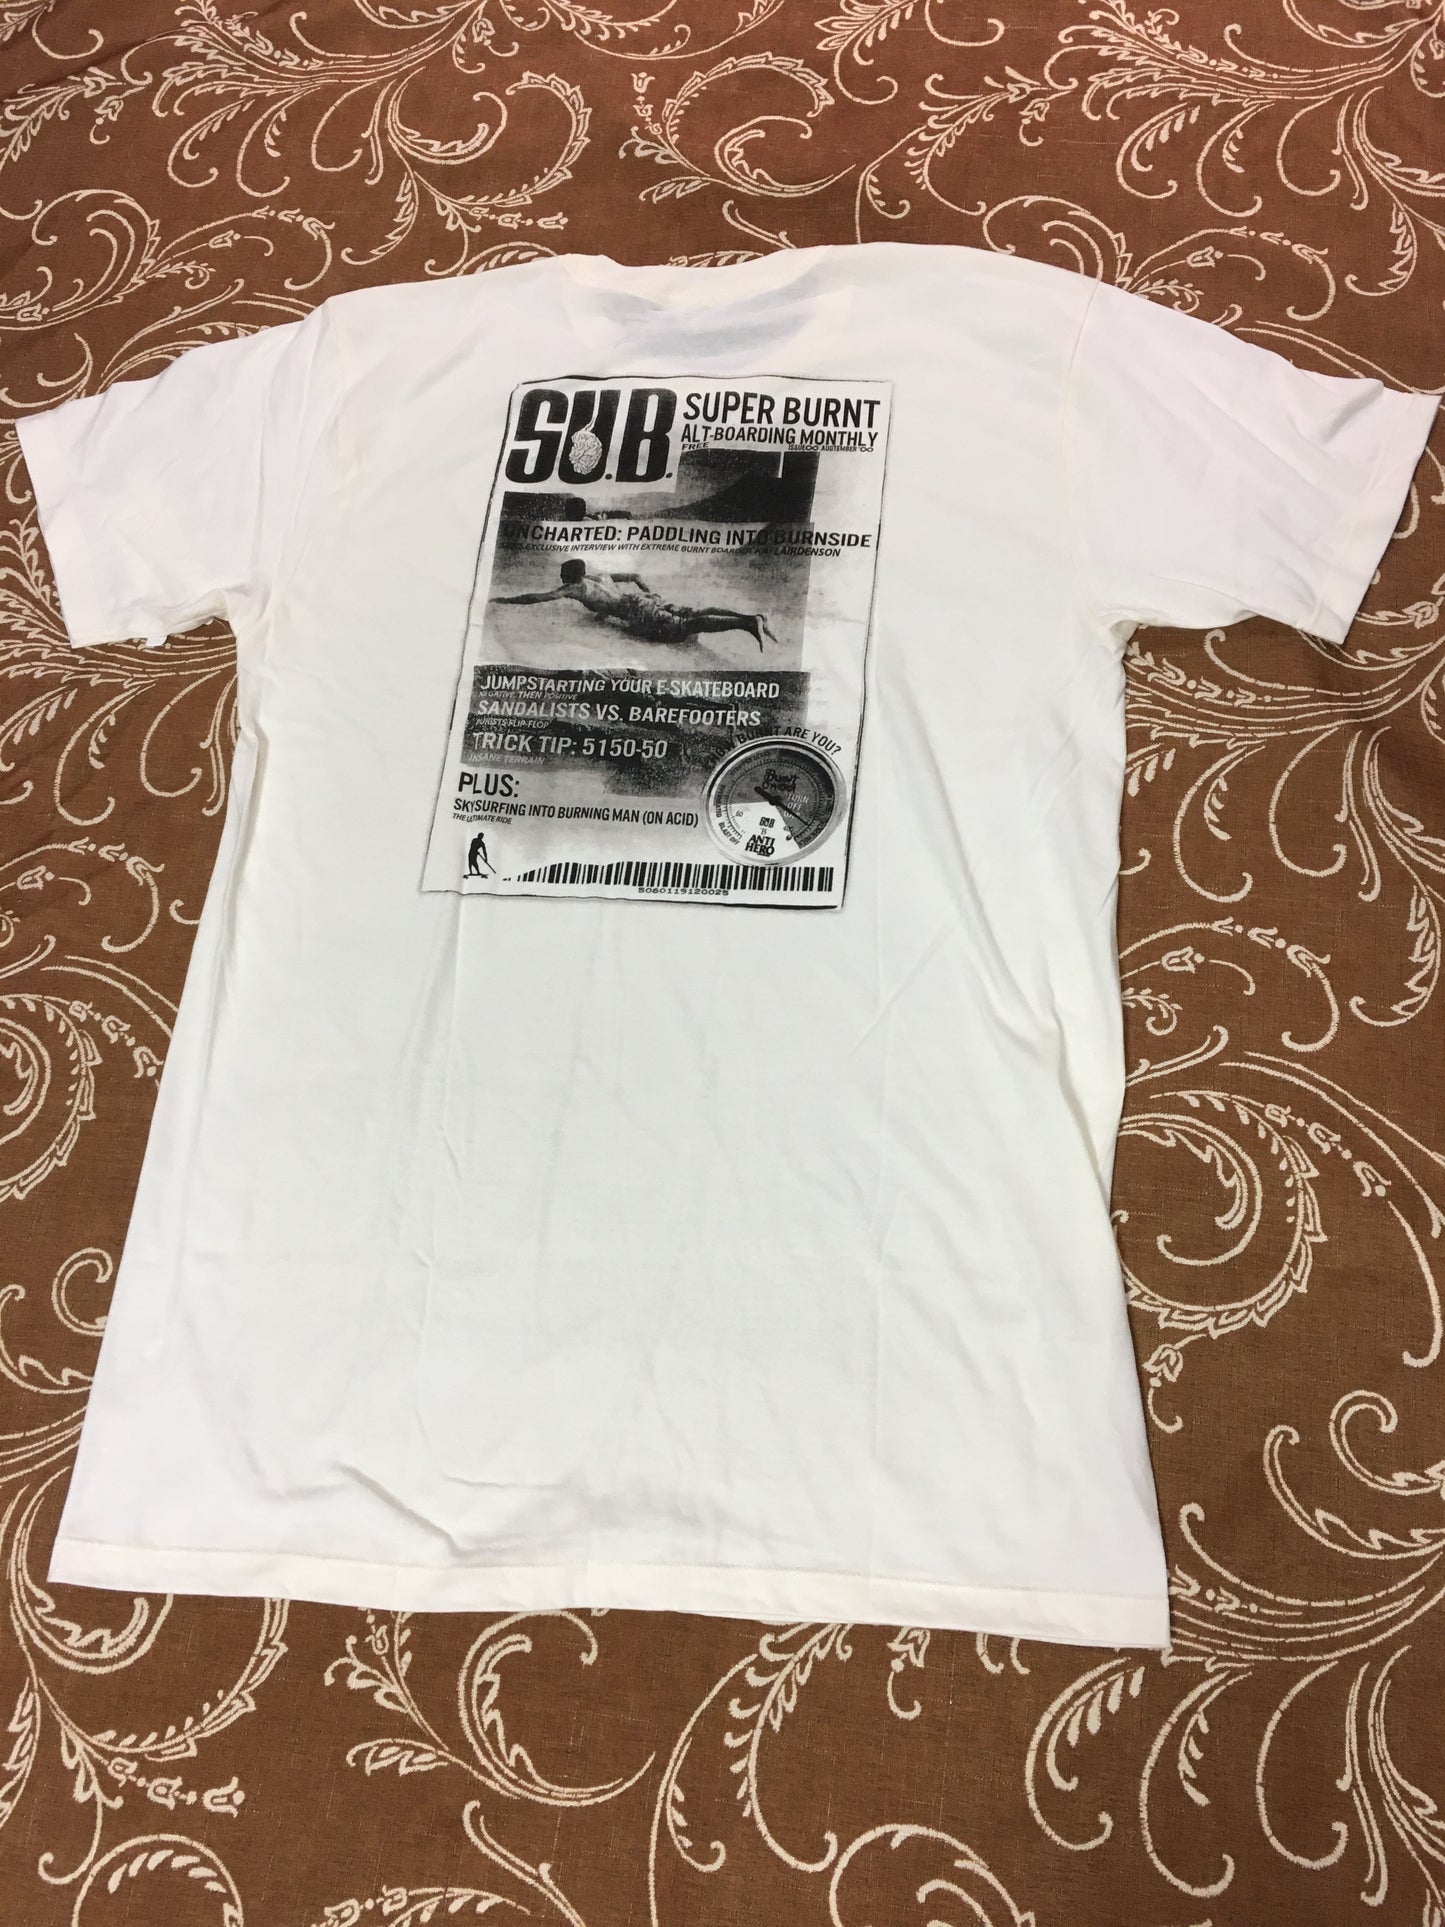 Superburn S/S Tee Shirt Crm/Blk (size options listed)